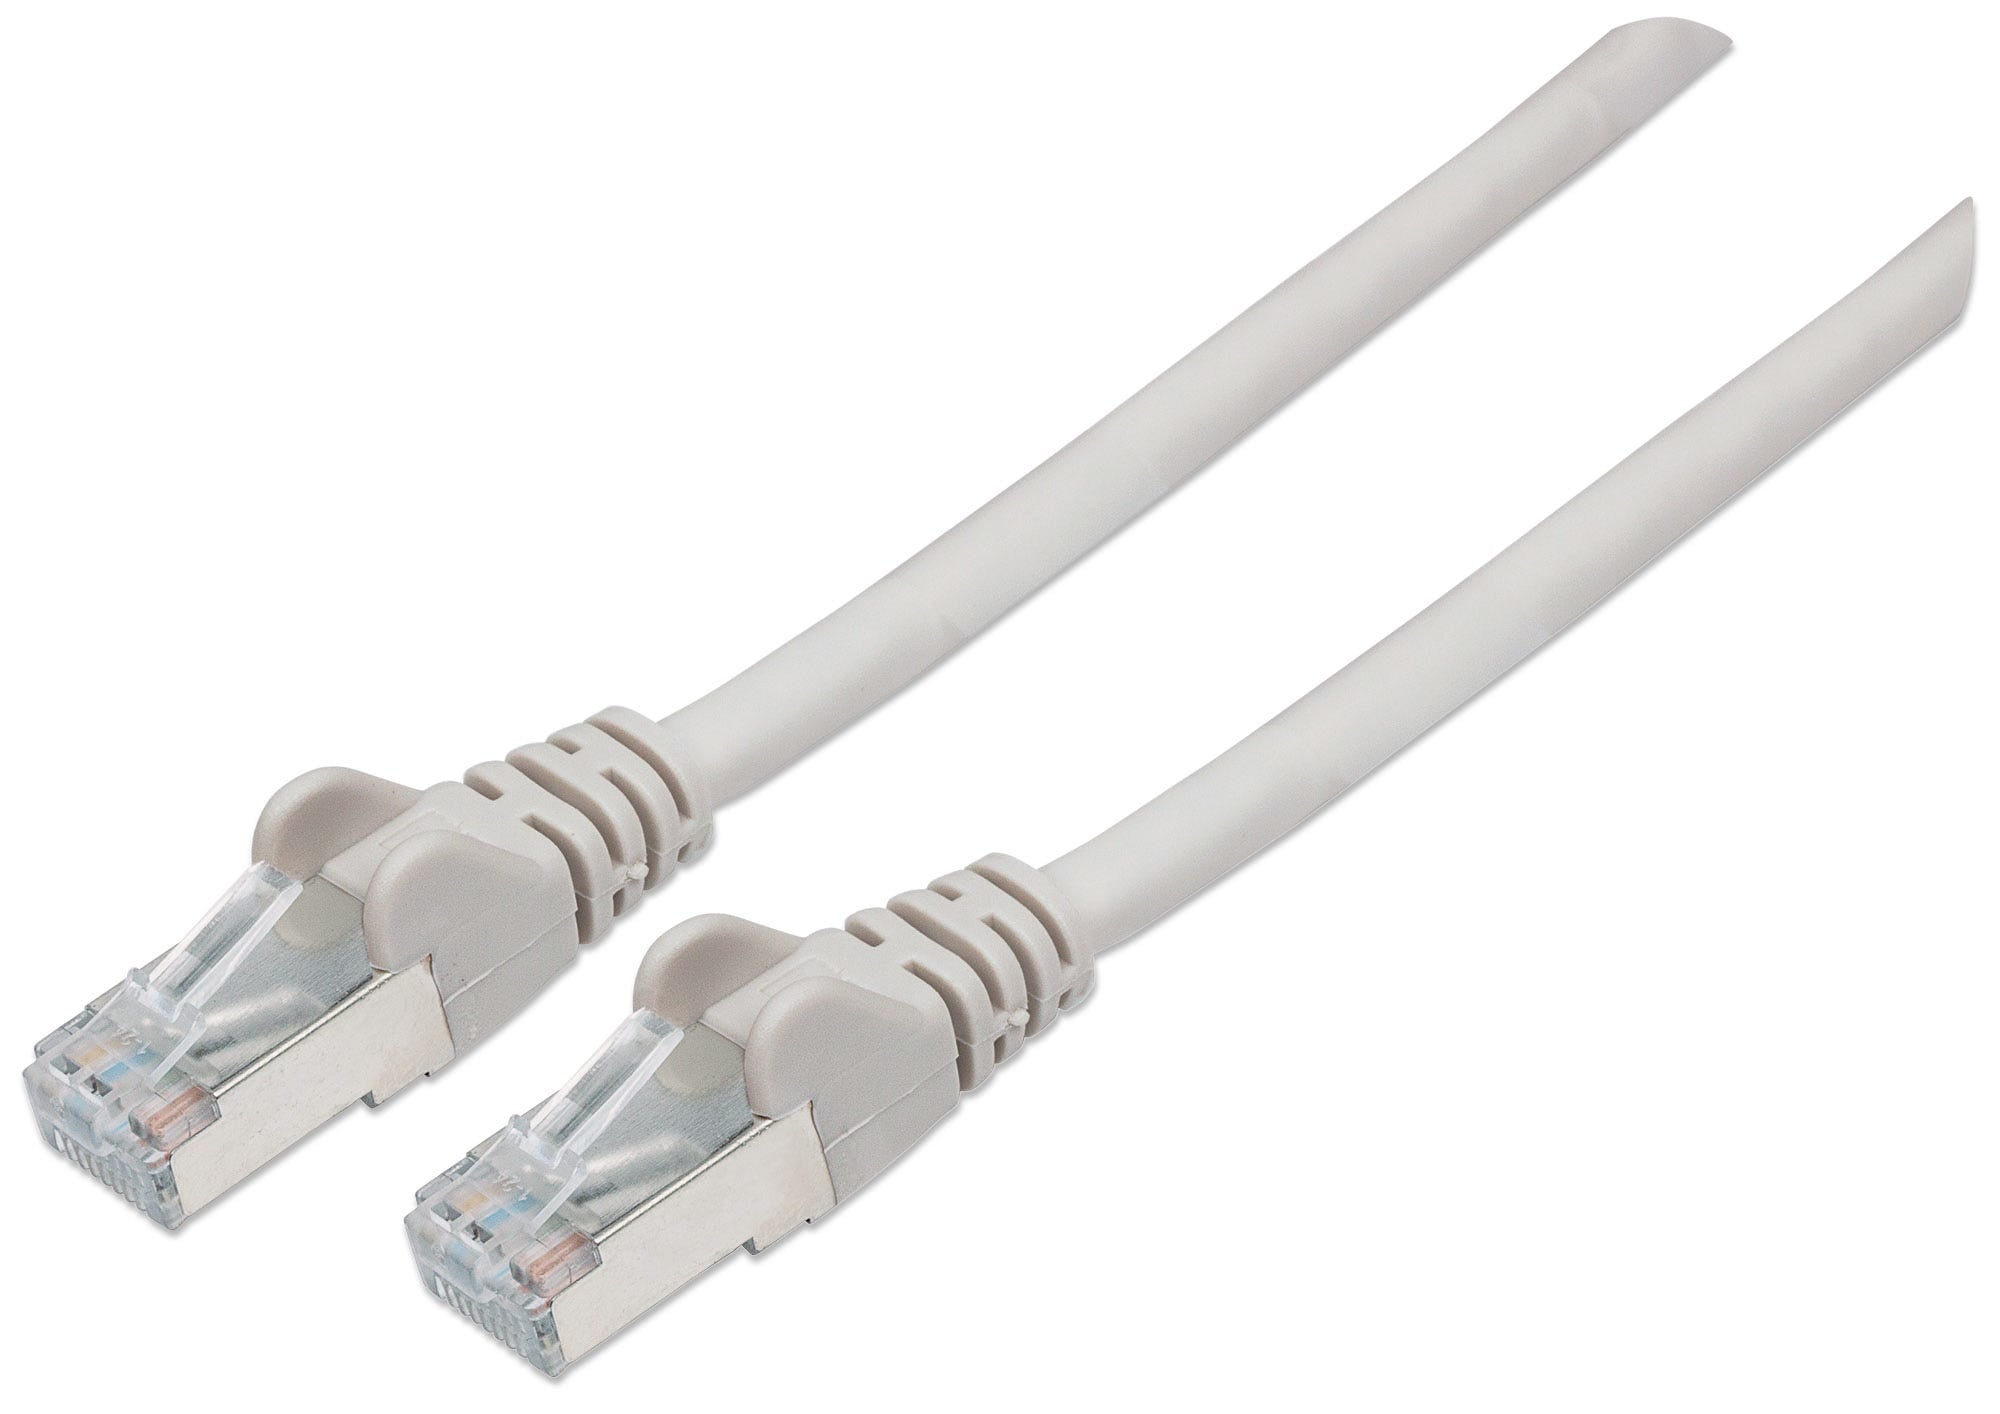 Intellinet Network Patch Cable, Cat6A, 30m, Grey, Copper, S/FTP, LSOH / LSZH, PVC, RJ45, Gold Plated Contacts, Snagless, Booted, Lifetime Warranty, Polybag